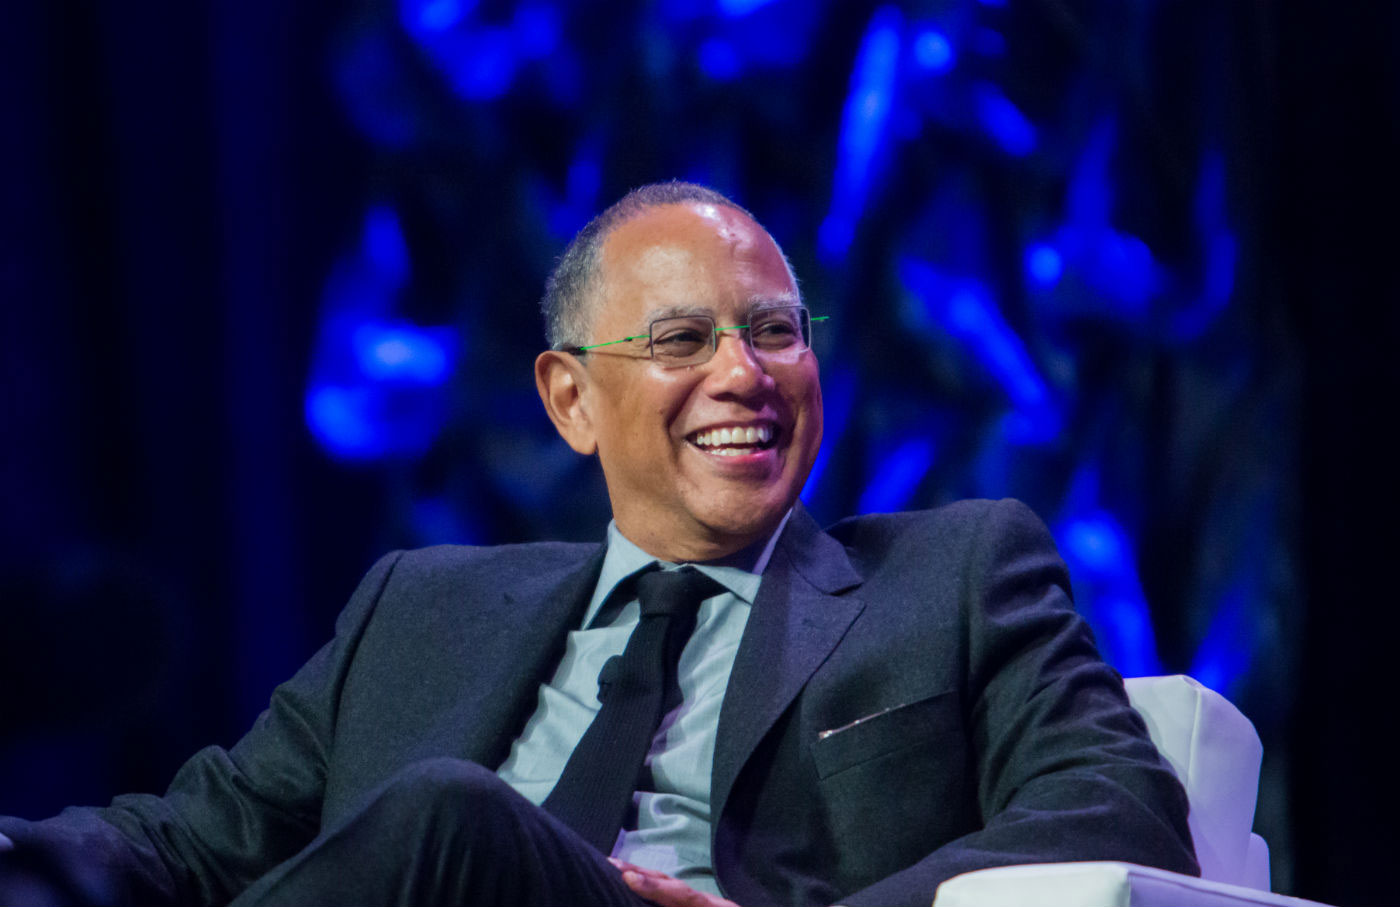 The New York Times Dean Baquet at SXSW